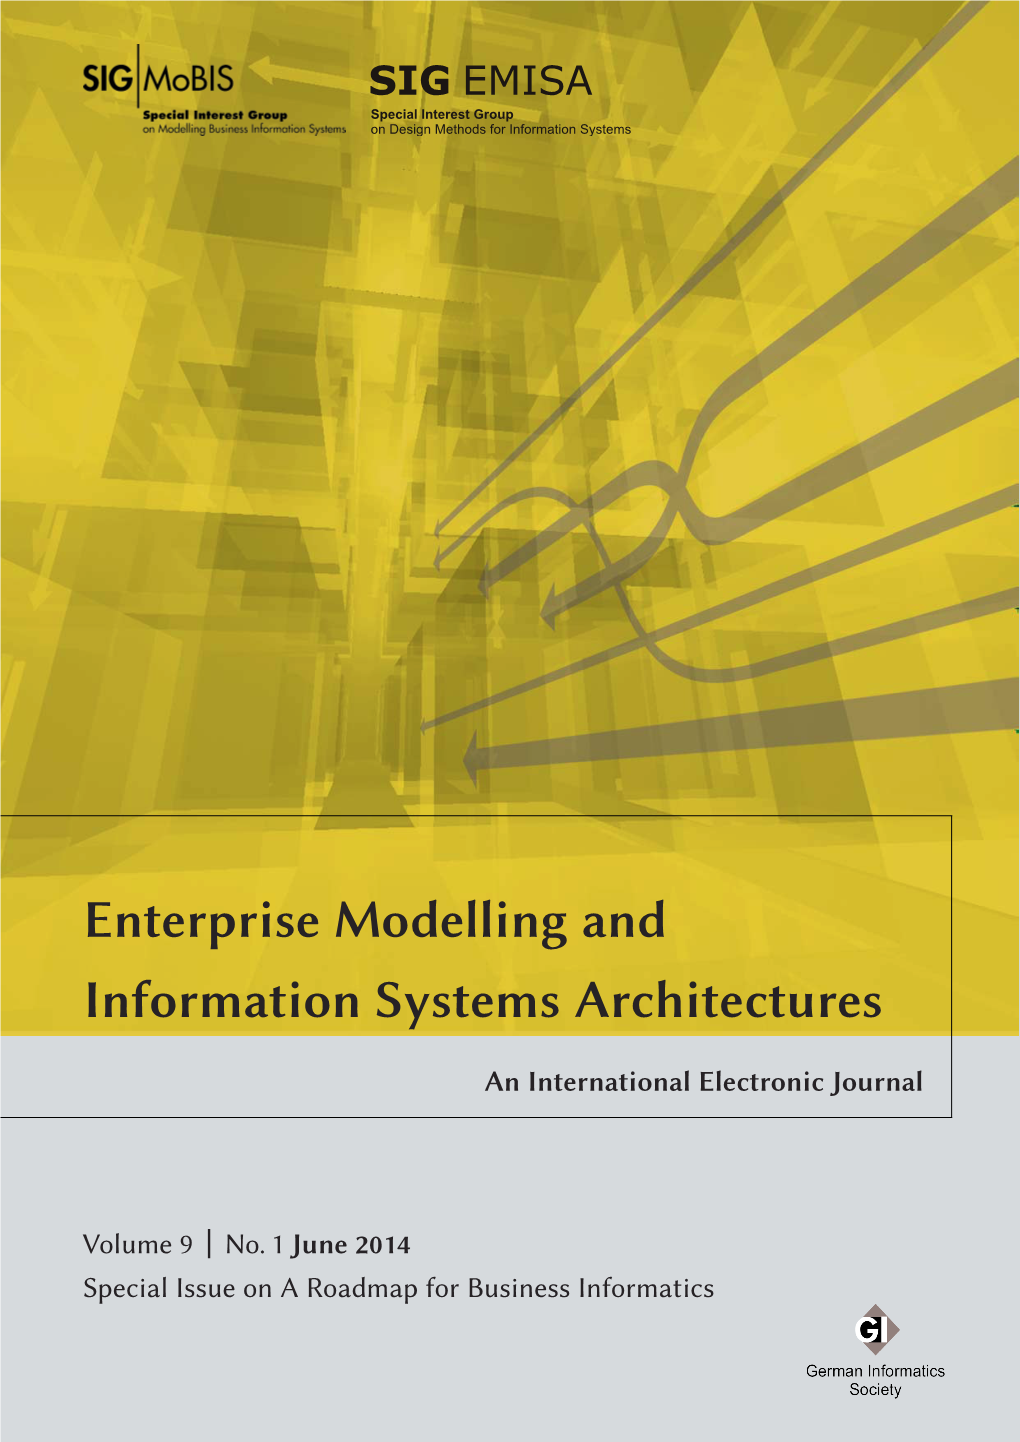 Enterprise Modelling and Information Systems Architectures